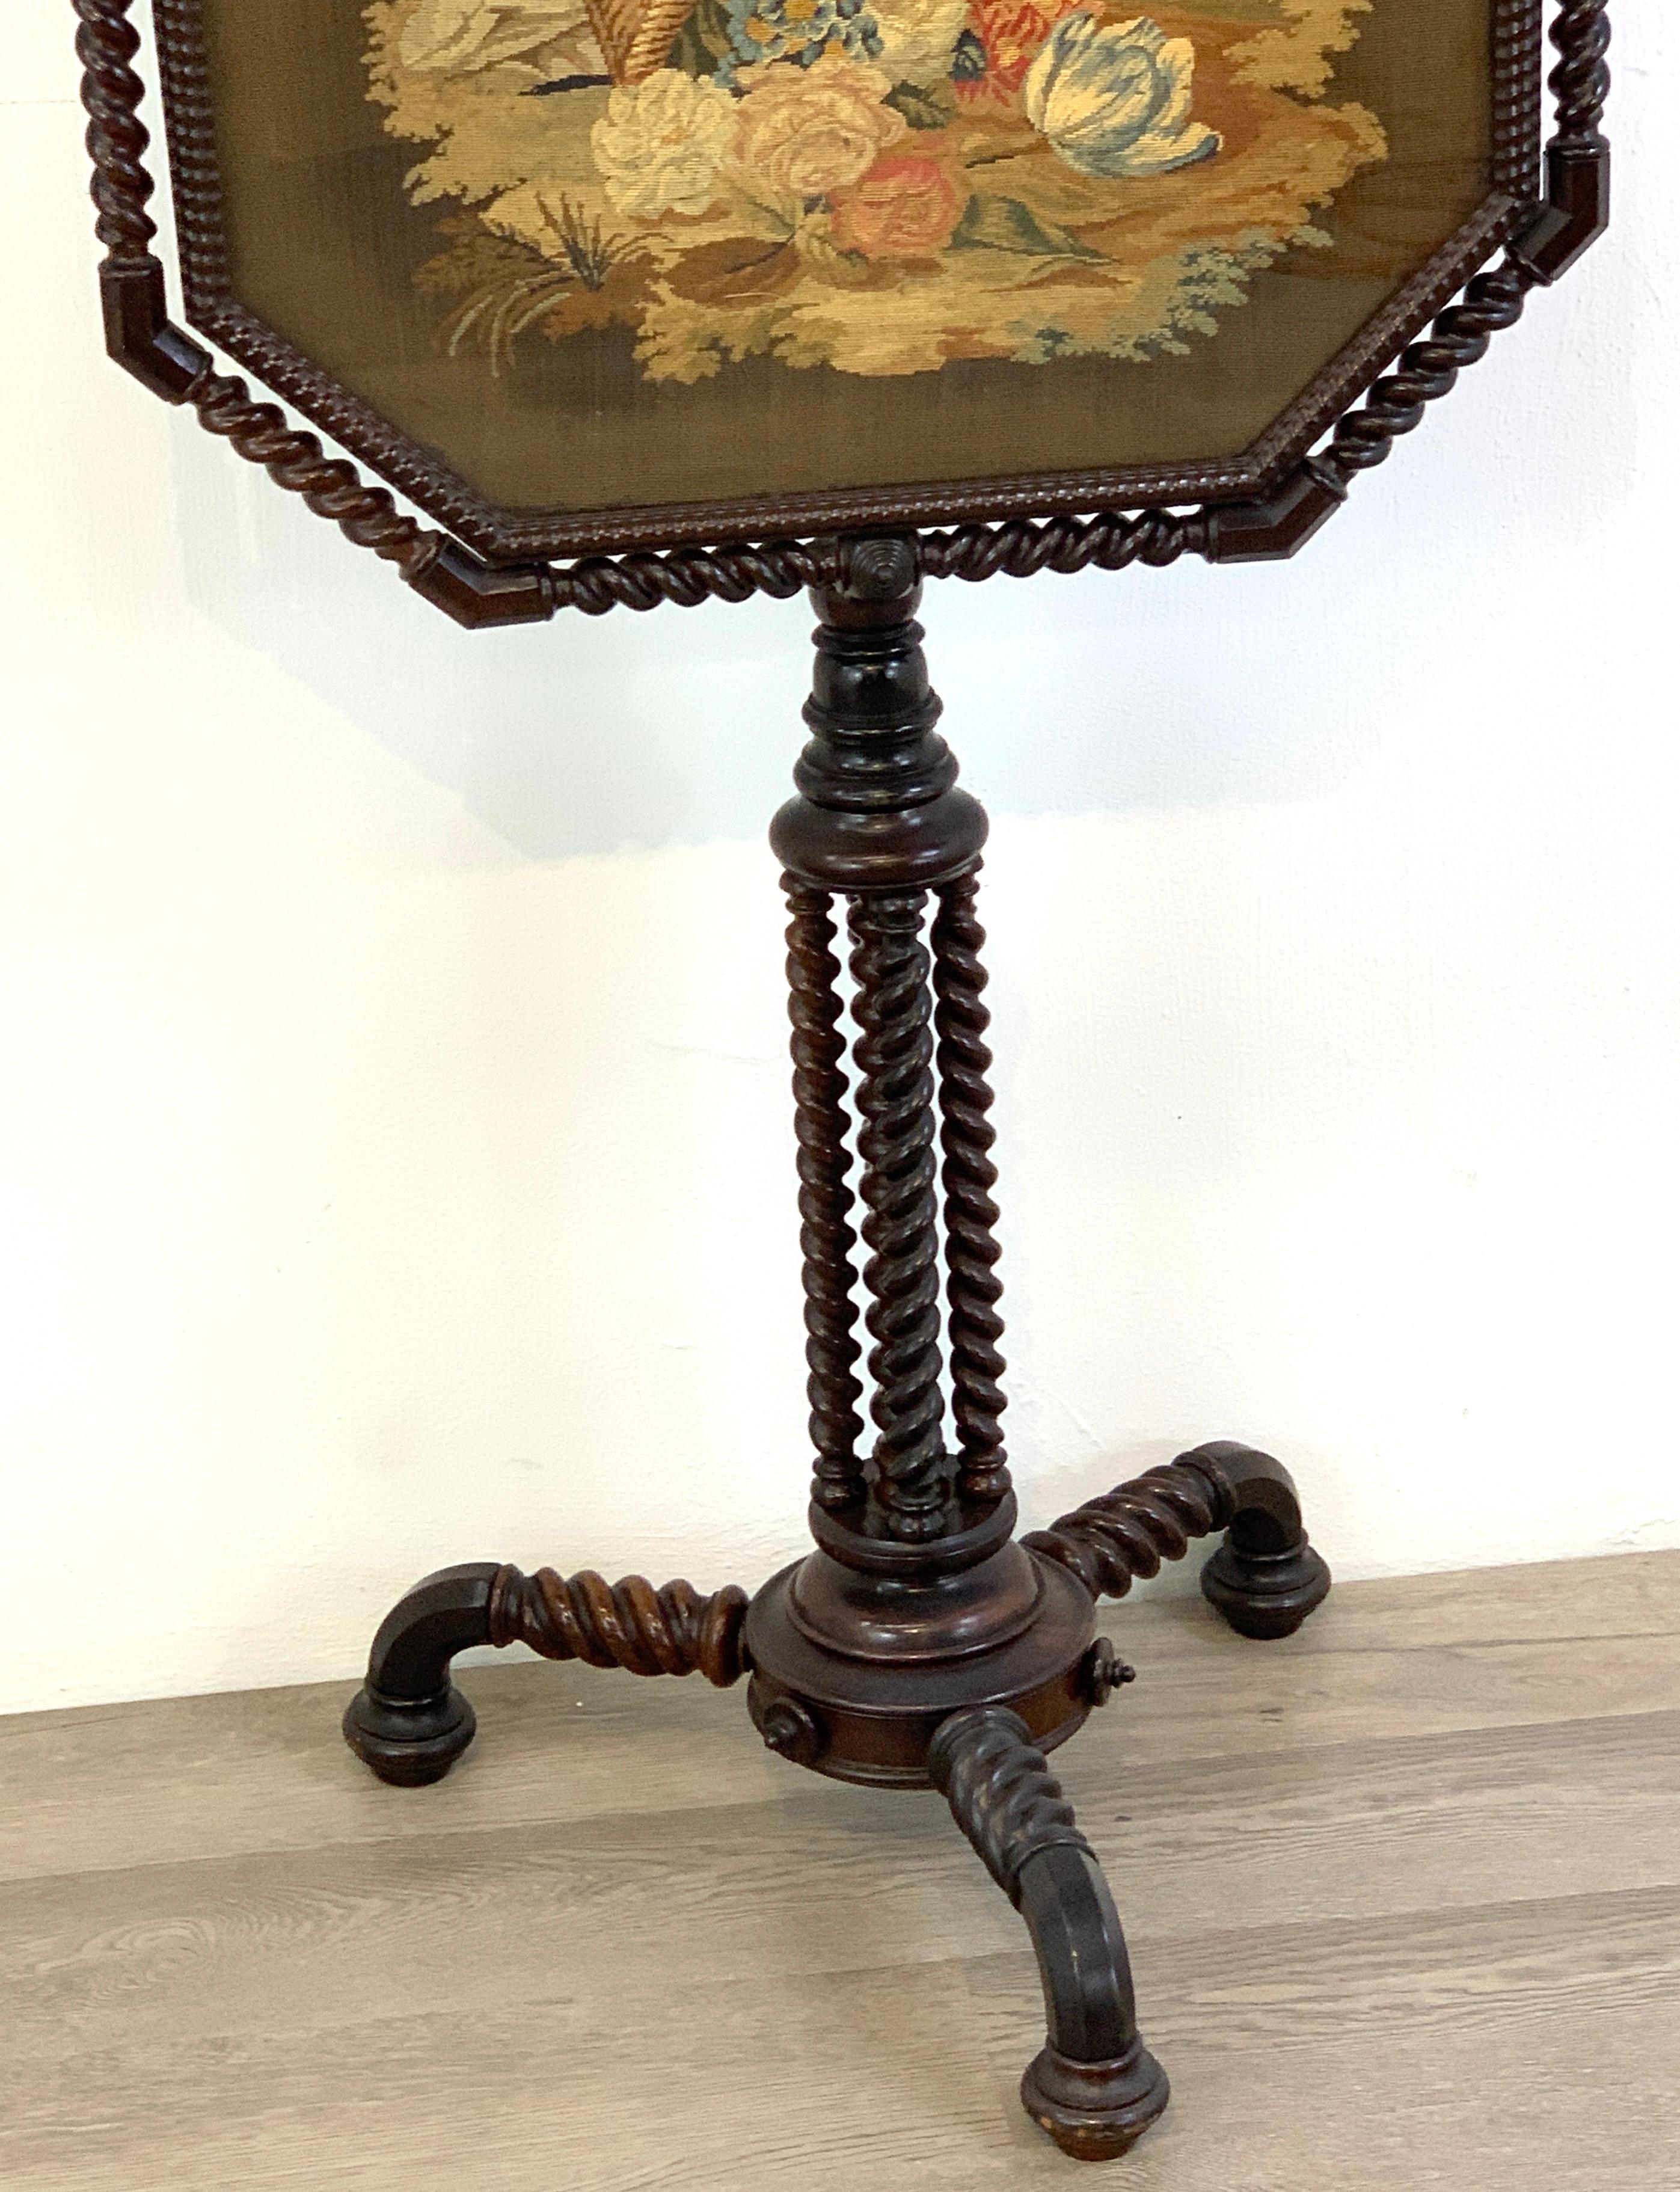 Wool Exquisite 19th Century Rosewood & Needlepoint Cockatoo in Landscape Firescreen For Sale